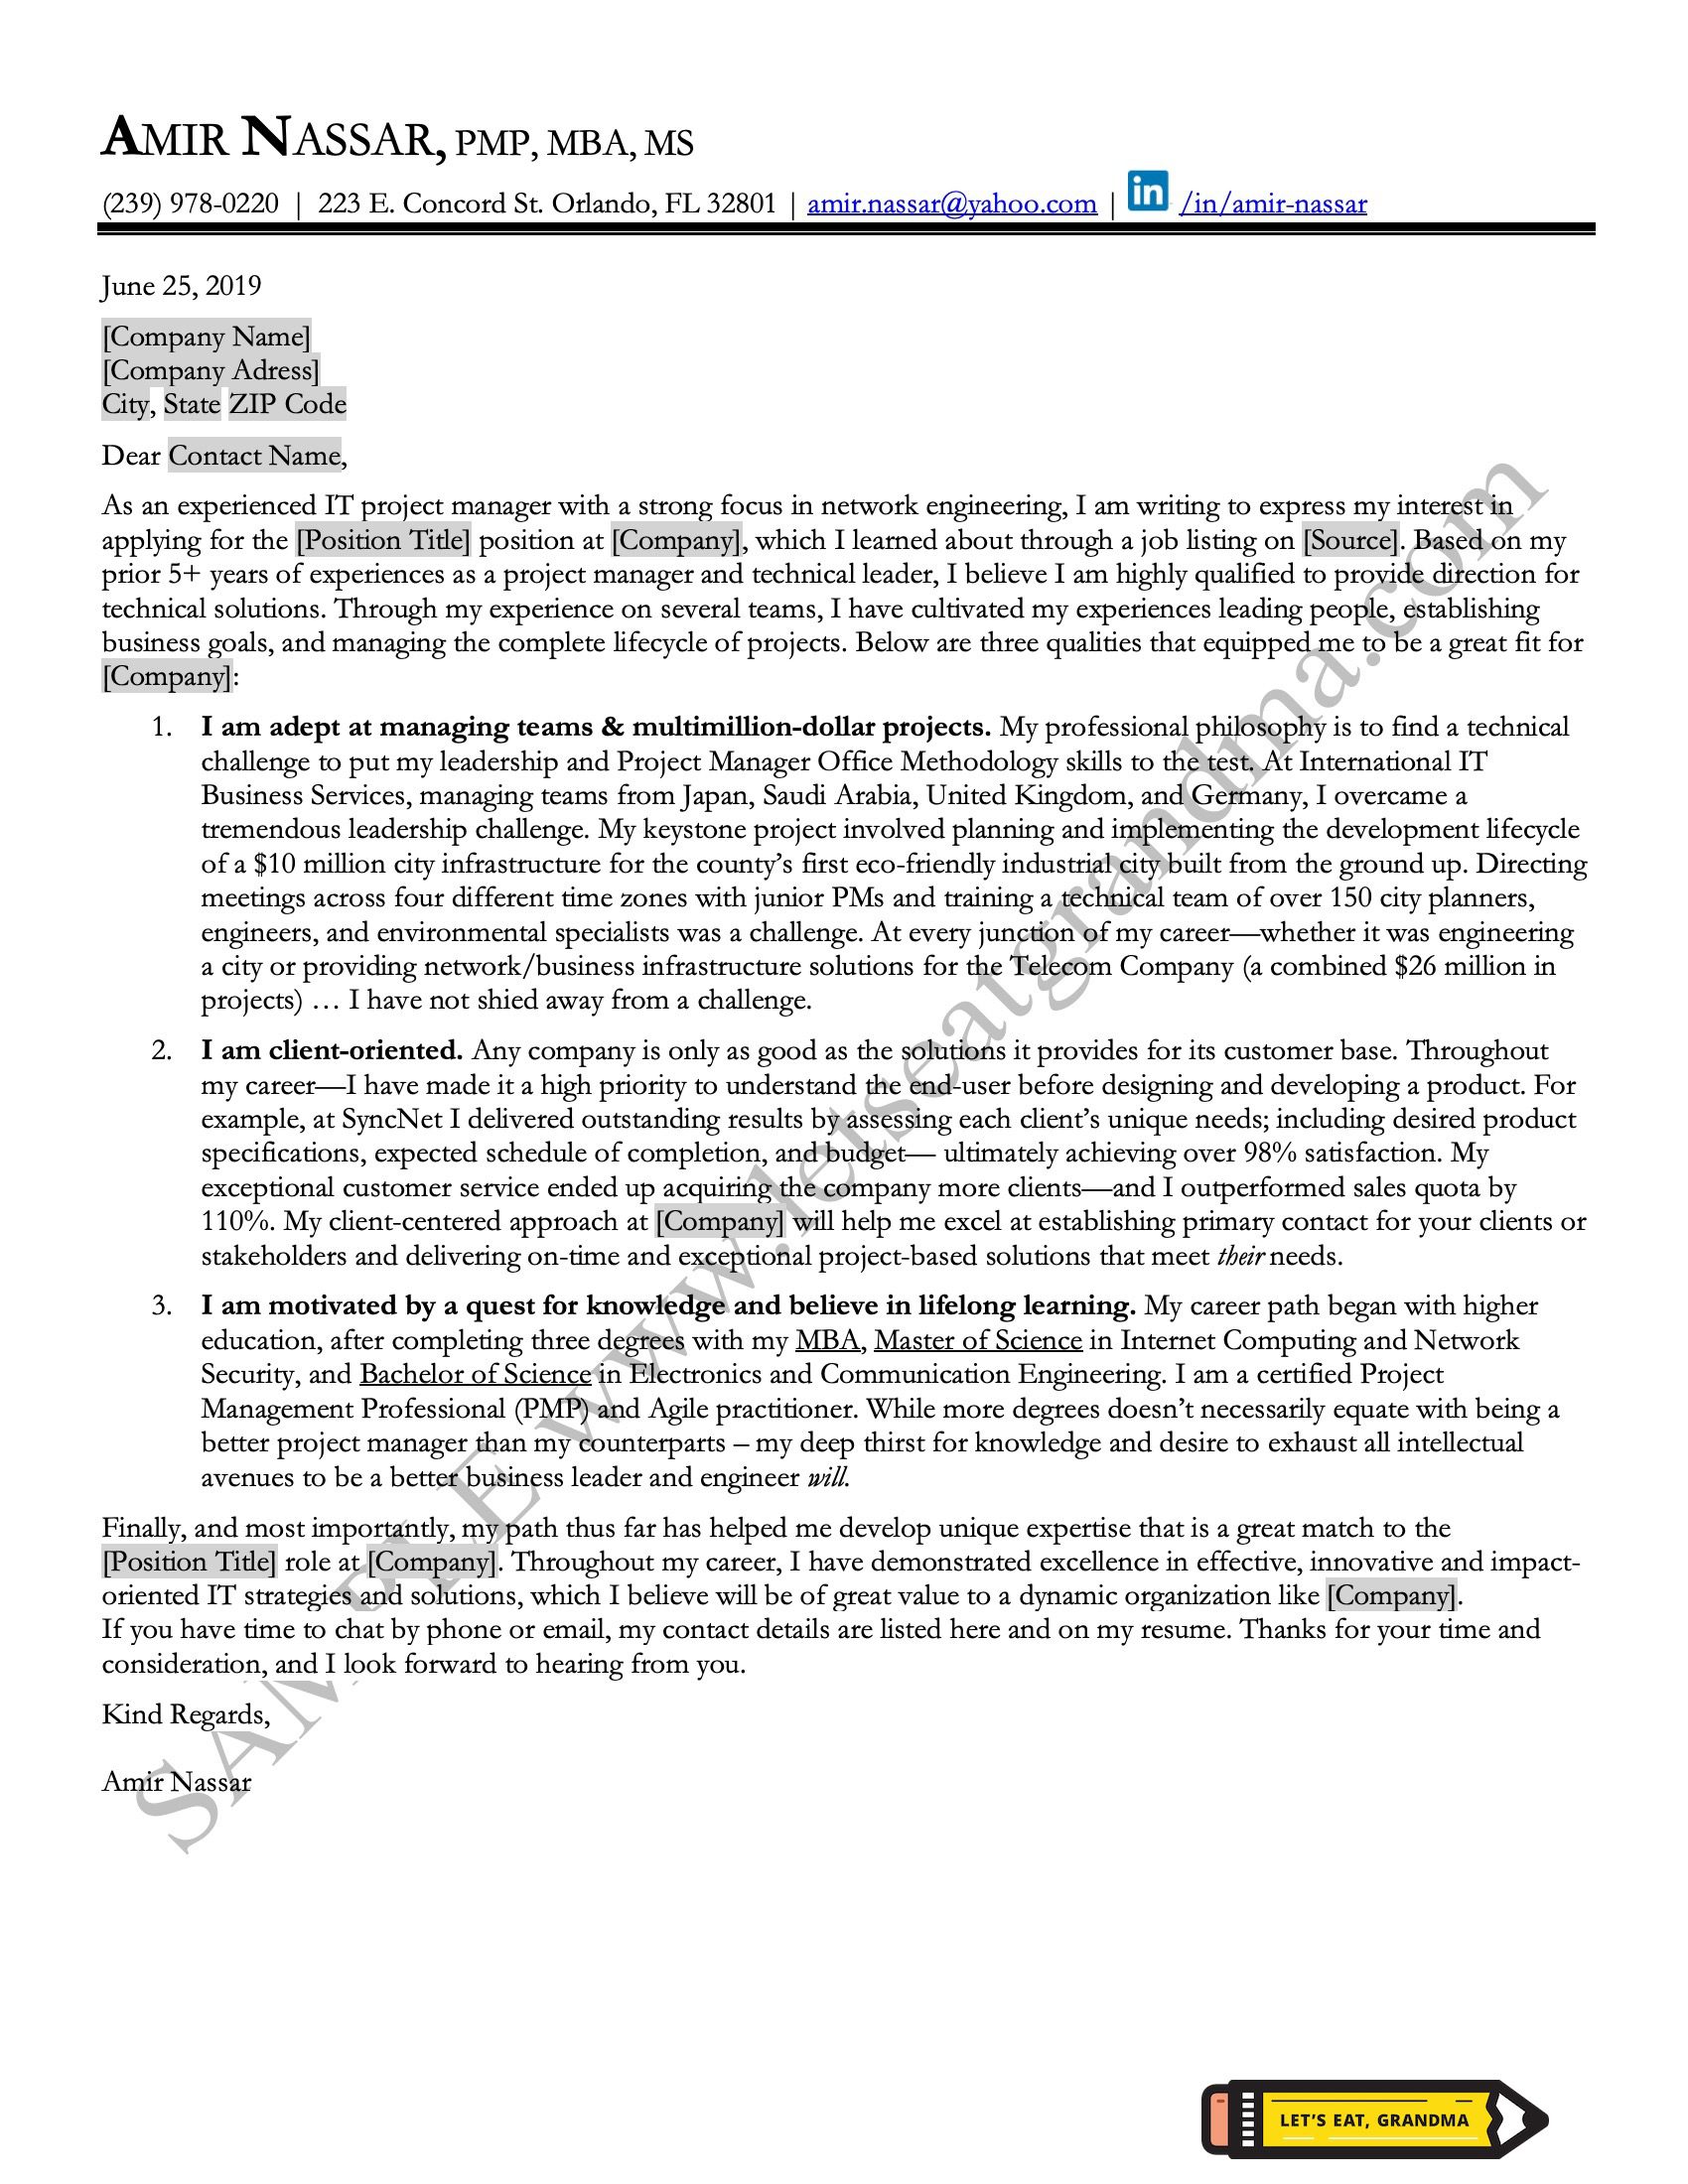 Project Manager Cover Letter Sample with Guide | Let's Eat, Grandma